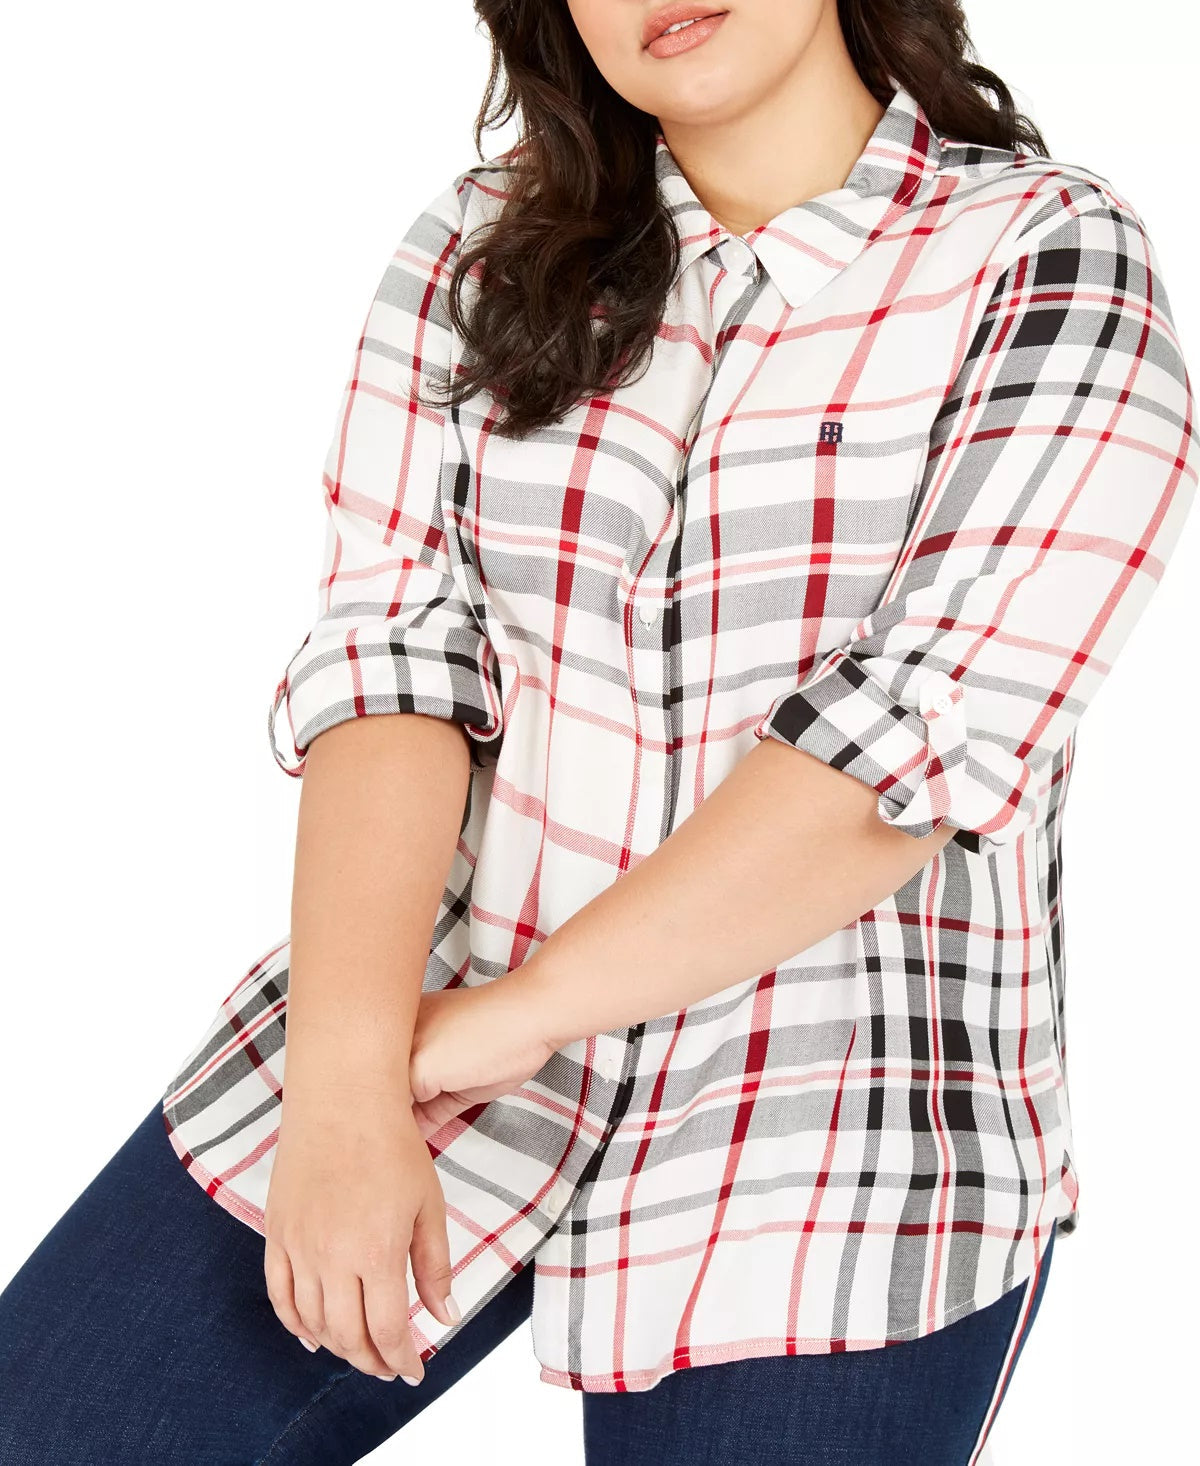 Tommy Hilfiger Women's Plus Size Plaid Button-Front Roll-Tab-Sleeve Top Red Size 0X